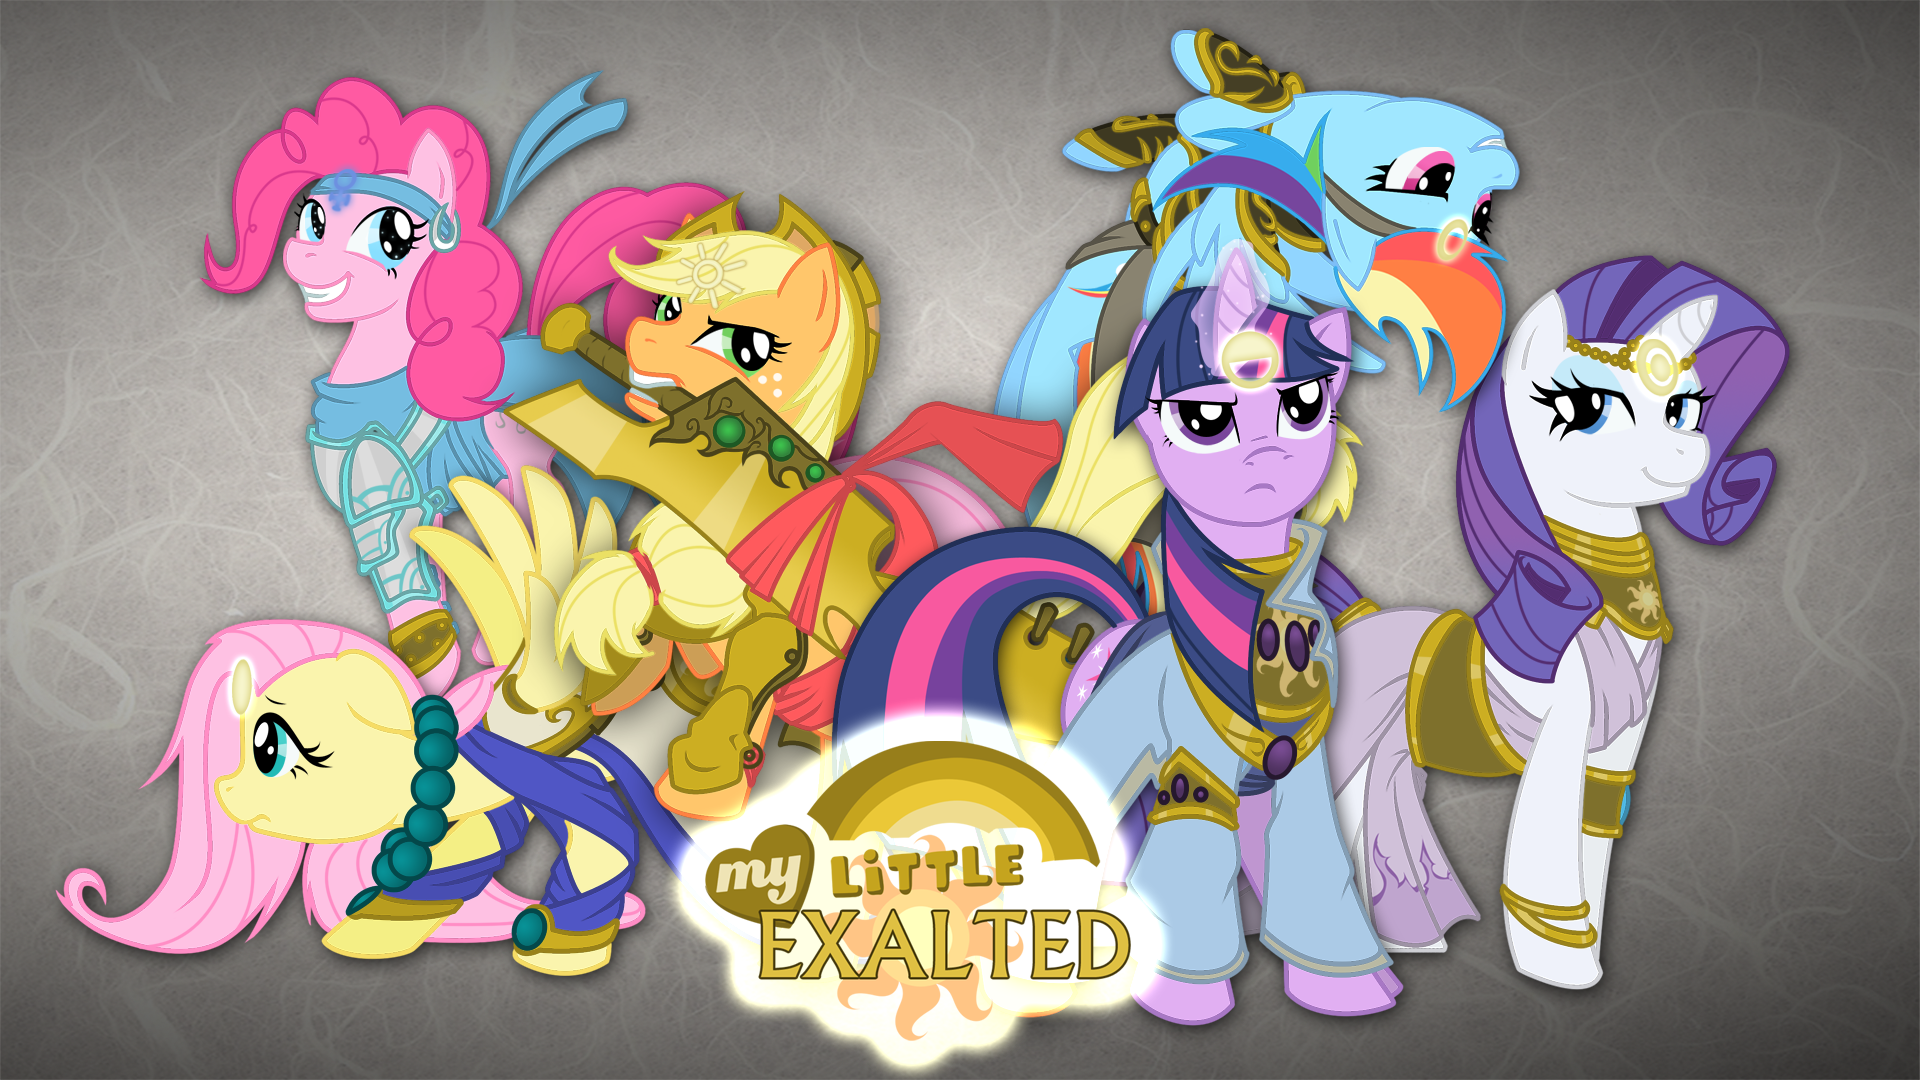 my_little_exalted_wallpaper_by_rhanite-d4b41v2.png